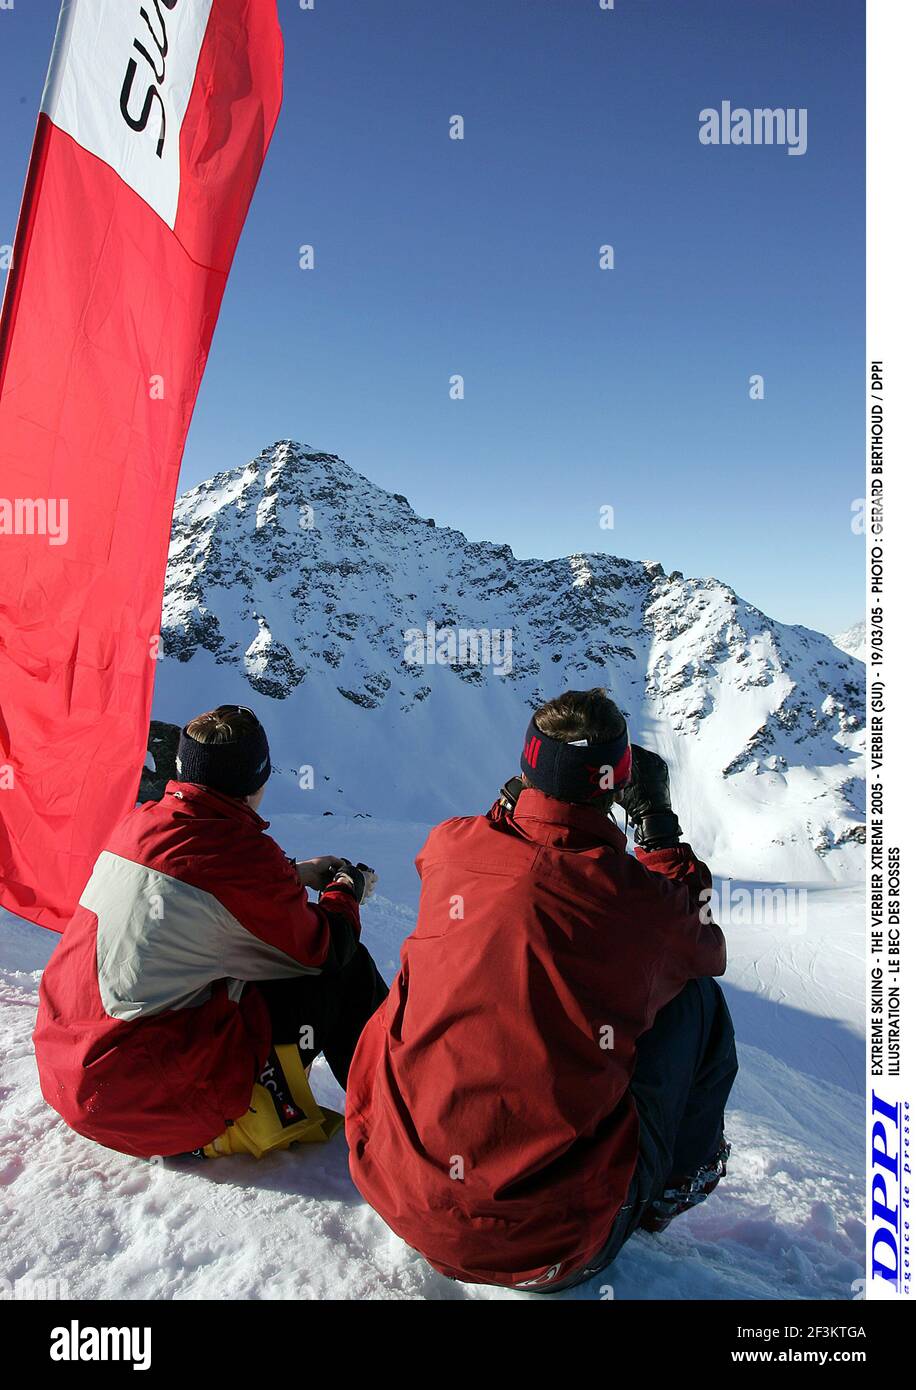 EXTREME SKIING - THE VERBIER XTREME 2005 - VERBIER (SUI) - 19/03/05 - PHOTO : GERARD BERTHOUD / DPPI ILLUSTRATION - LE BEC DES ROSSES Stock Photo